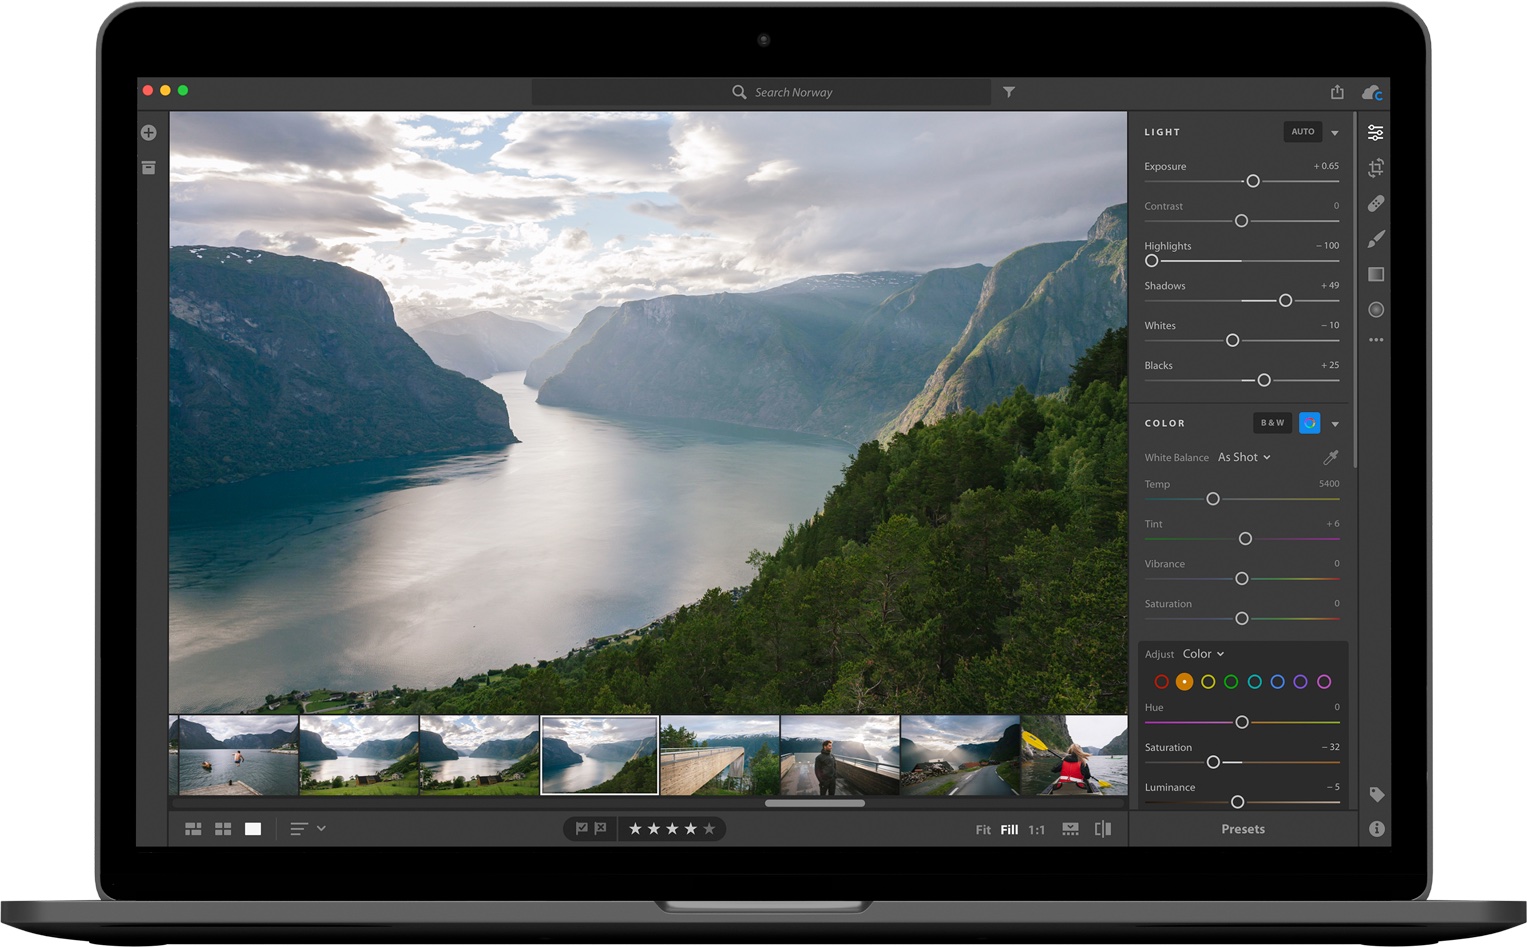 Adobe begins rolling out support for Apple's HEIF image format